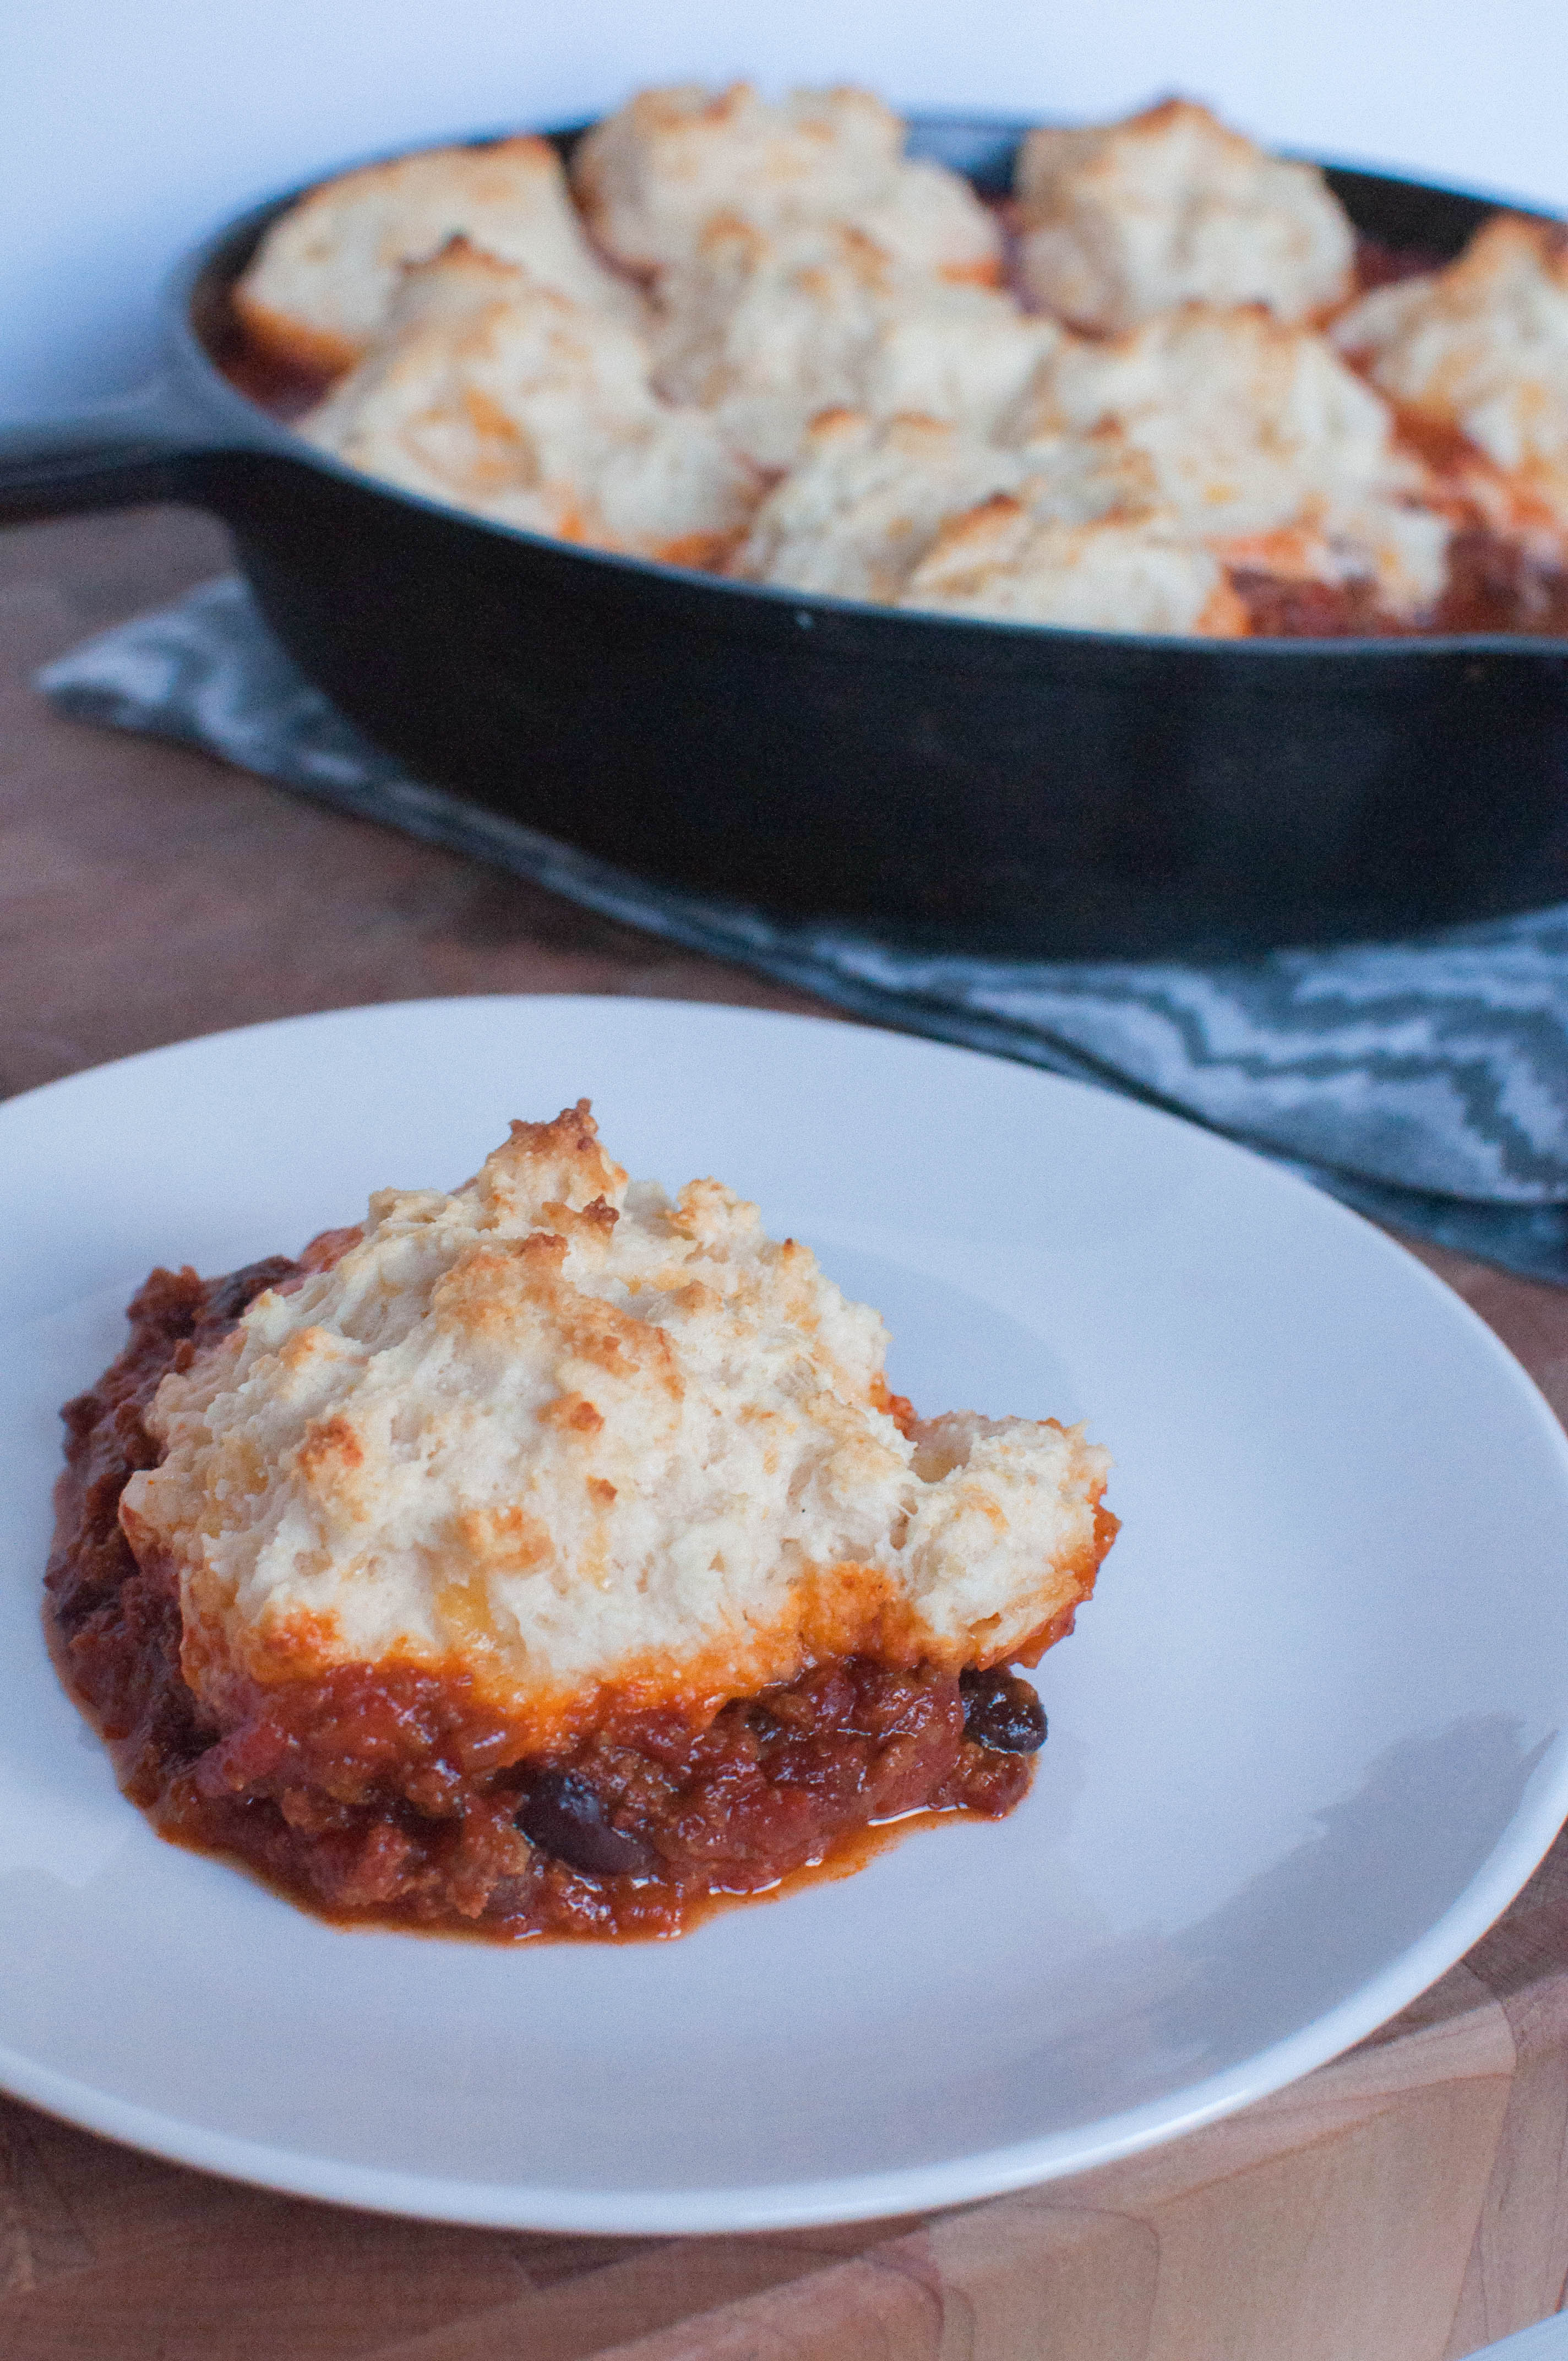 Chili Pot Pie with Cheddar Drop Biscuits